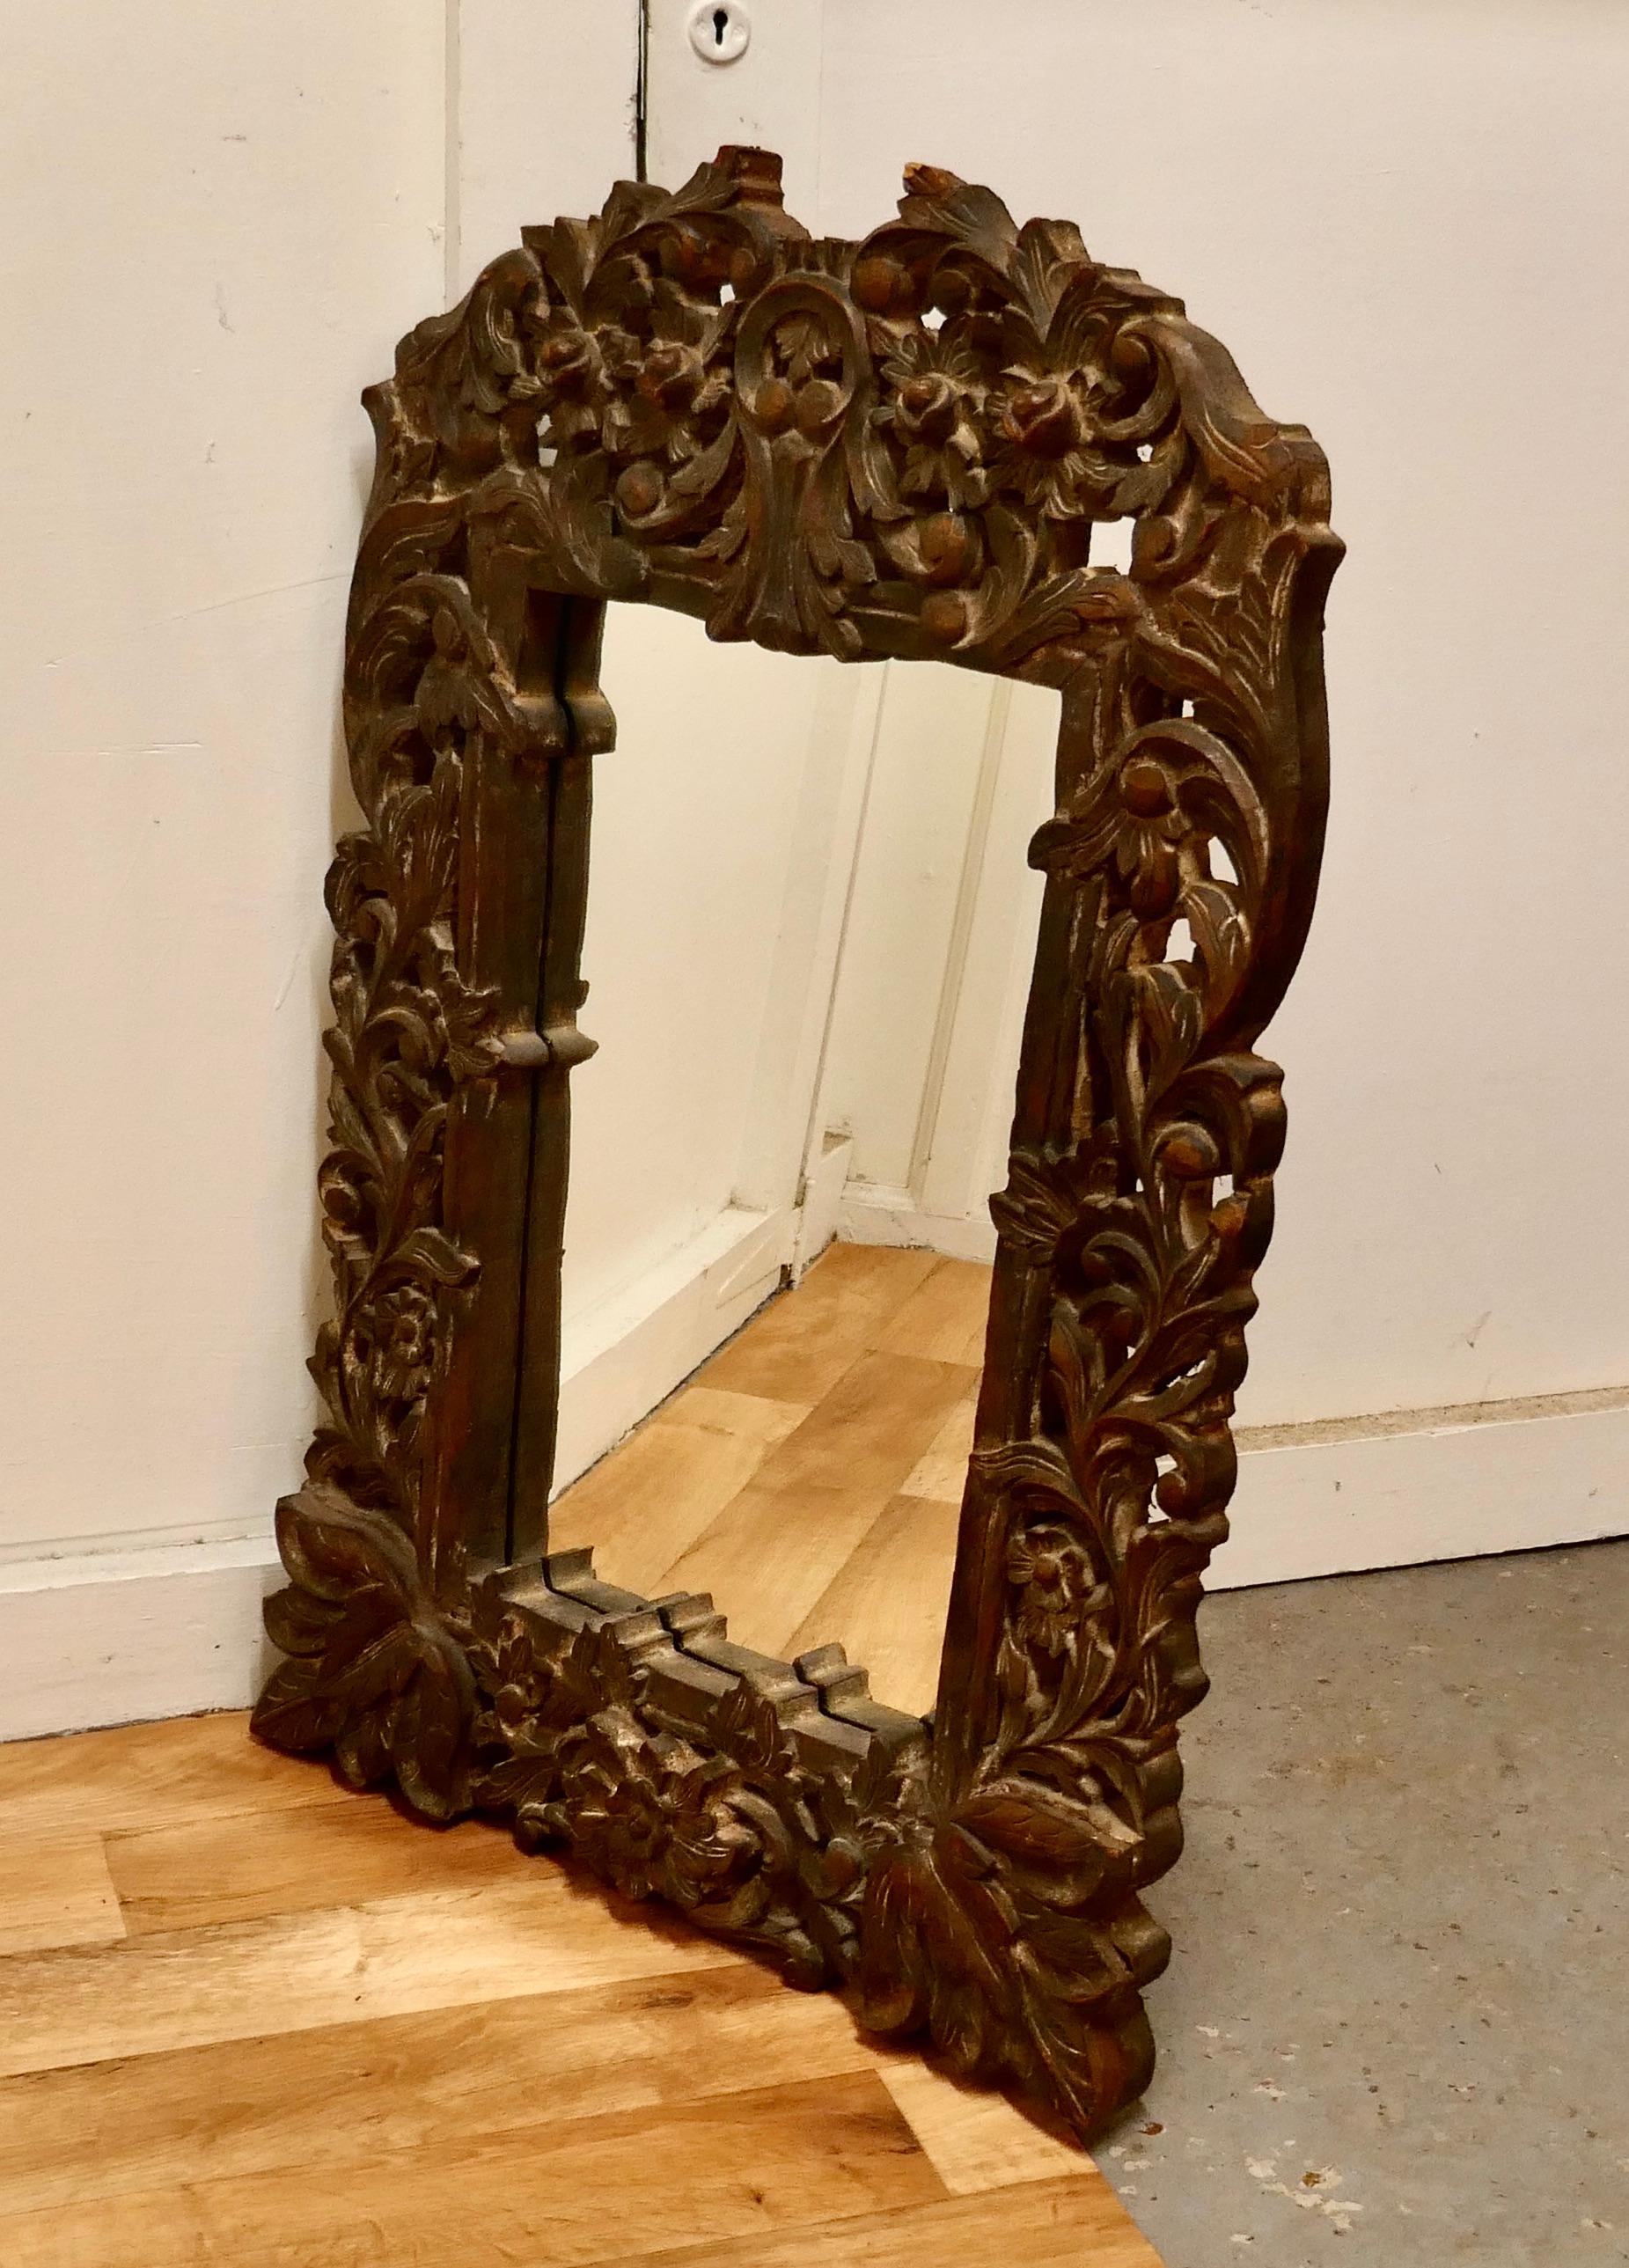 Heavily carved fruitwood mirror.

A lovely piece from the east the 6” wide frame is intricately carved with leaves and fruits, the looking glass is new.
The painted surface of the carved wood was previously painted this is now rather faded with